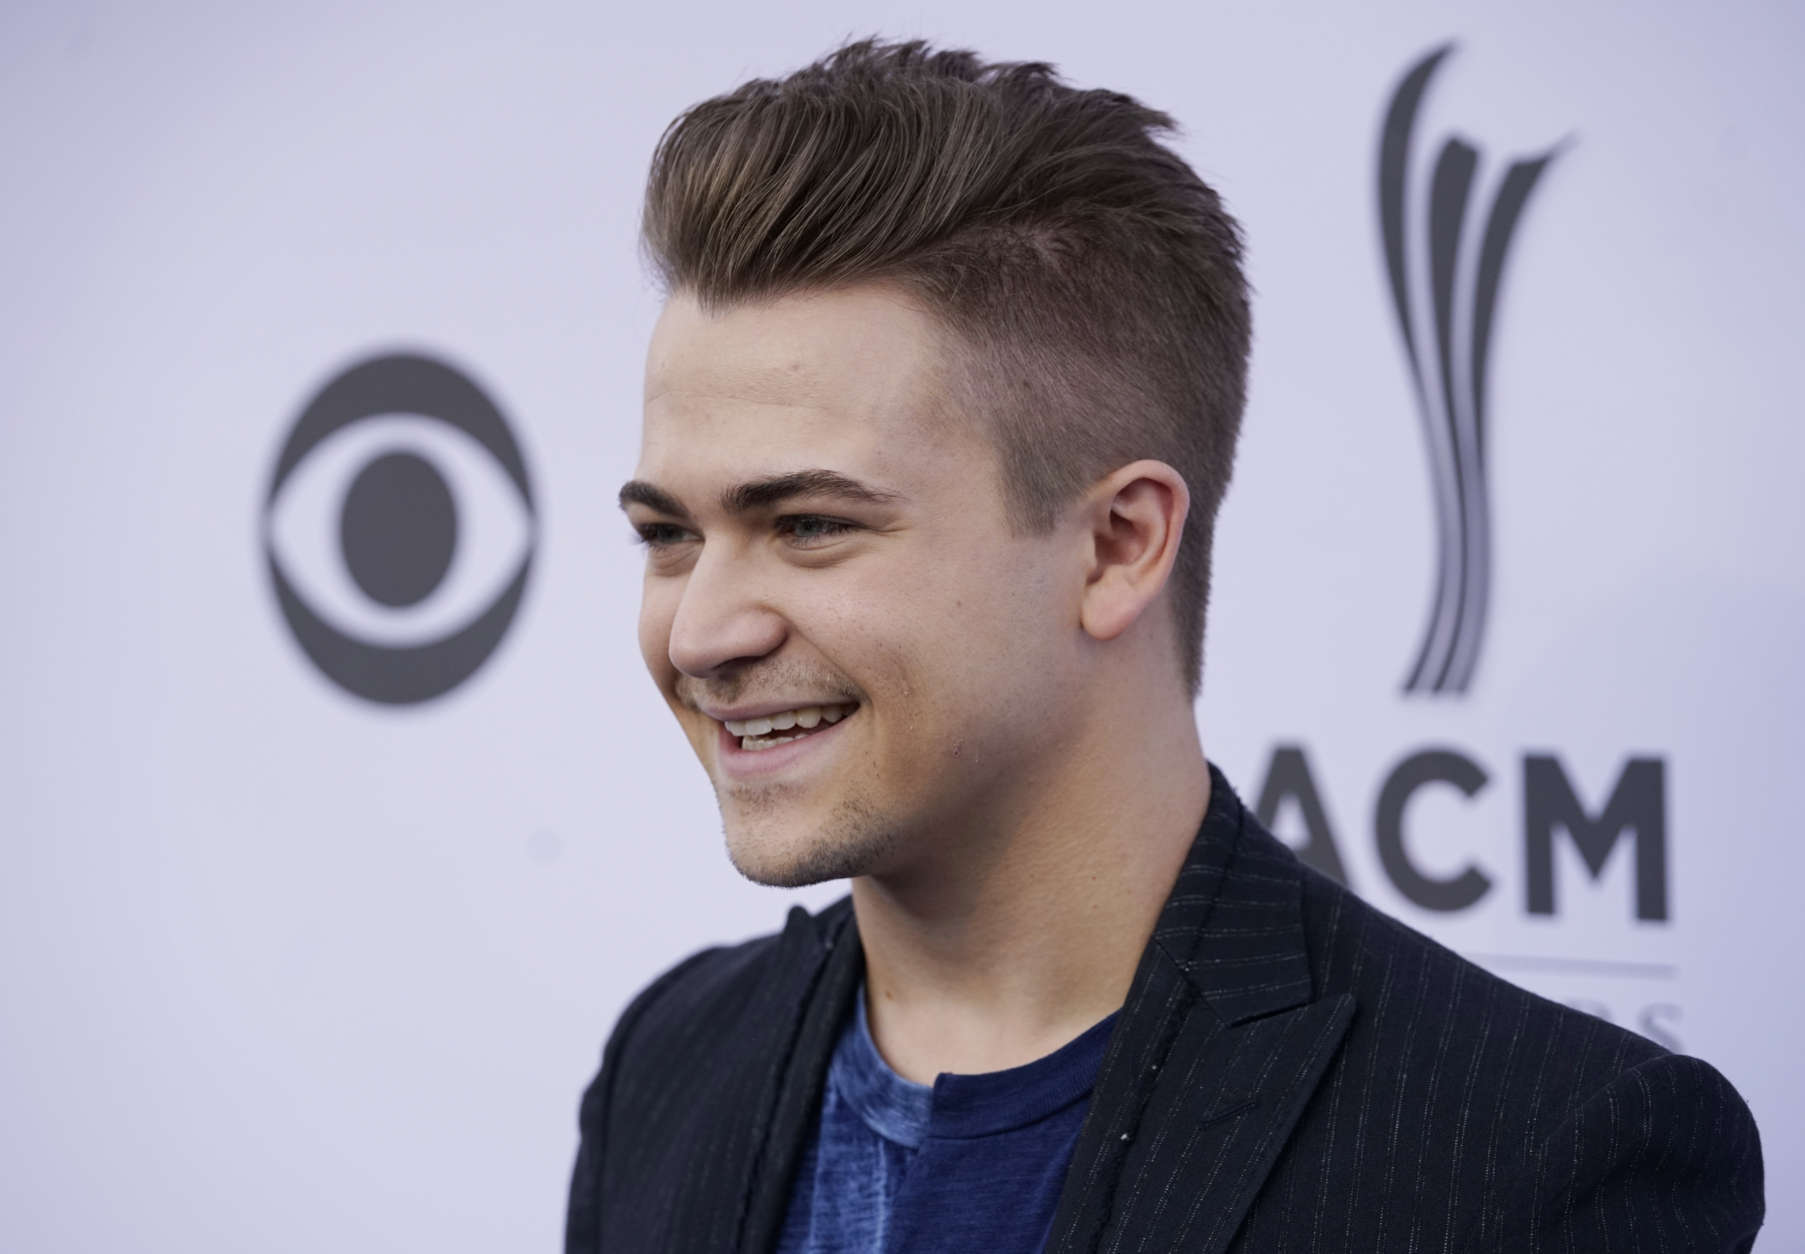 Hunter Hayes arrives at the 11th annual ACM Honors at Ryman Auditorium on Wednesday, Aug. 23, 2017, in Nashville, Tenn. (Photo by Sanford Myers/Invision/AP)